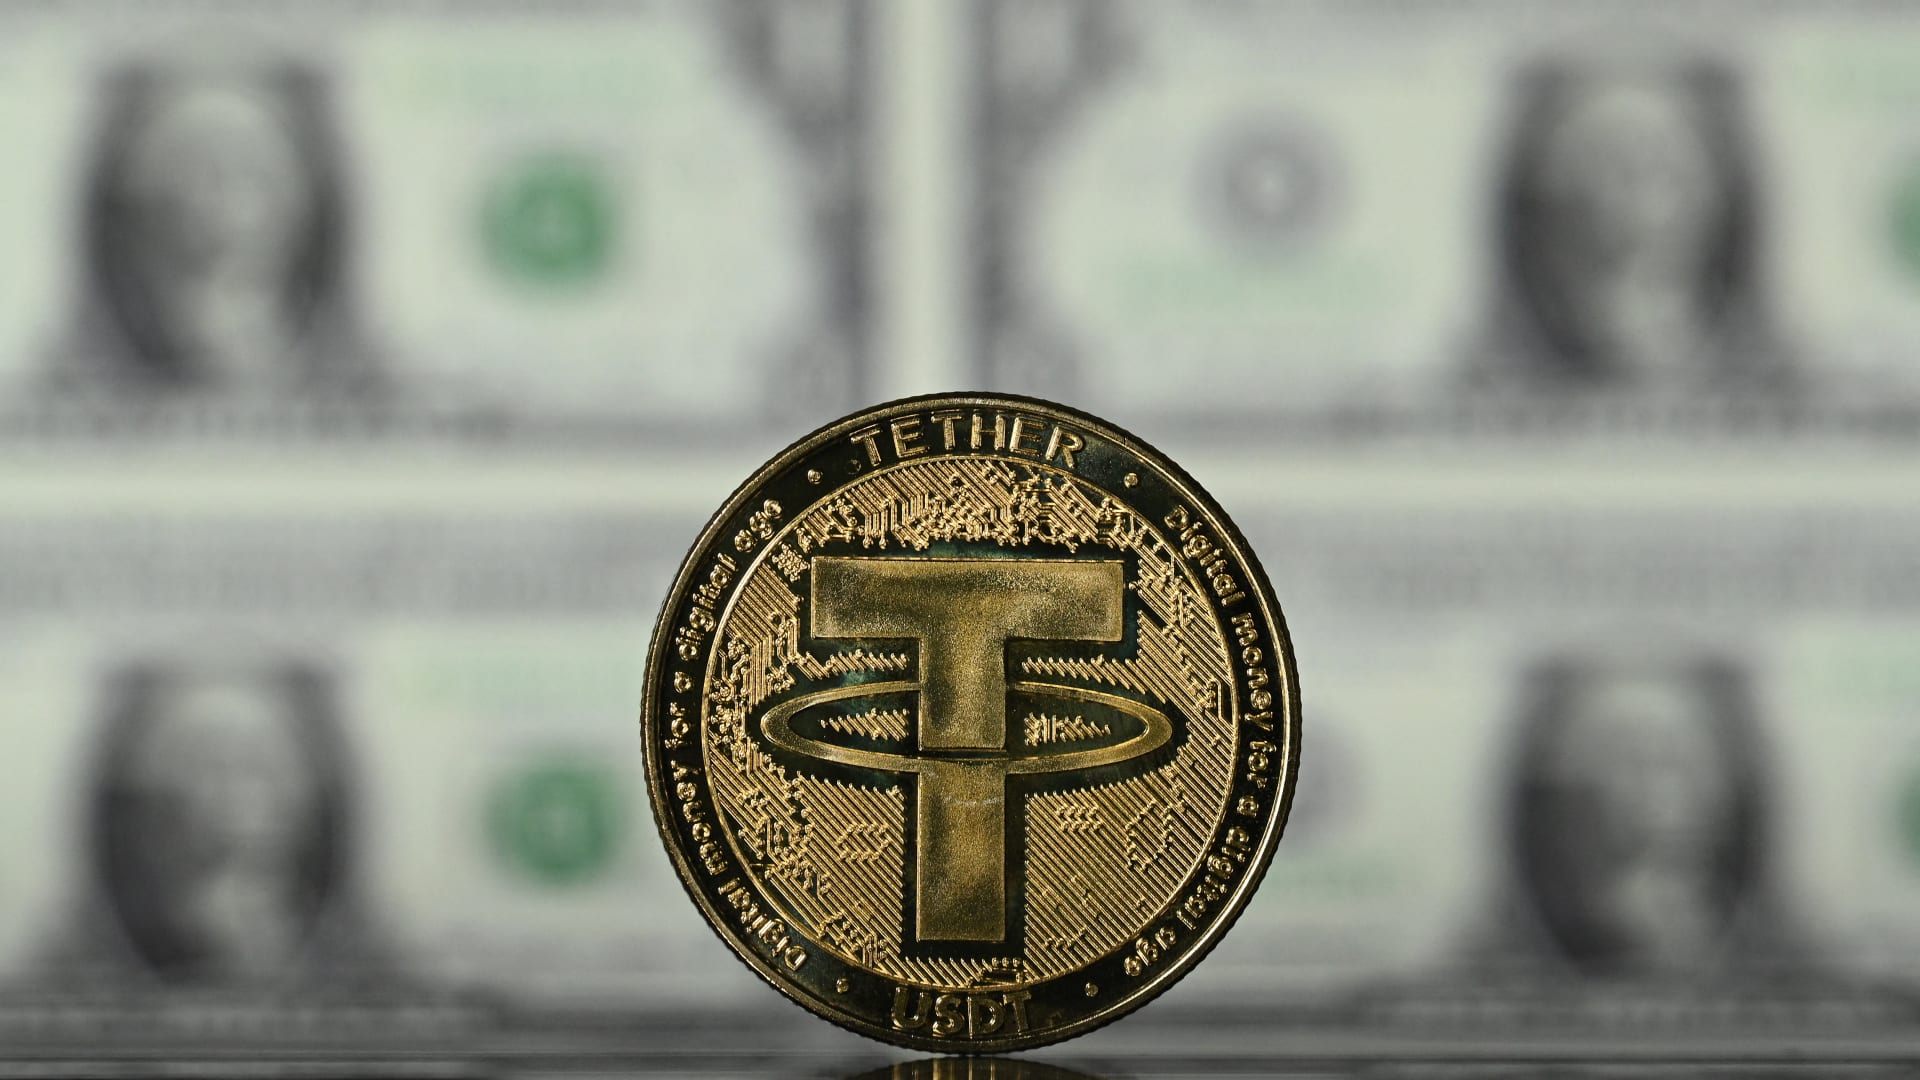 Tether freezes 32 crypto wallets holding 3,118 linked to terrorism and warfare in Israel, Ukraine